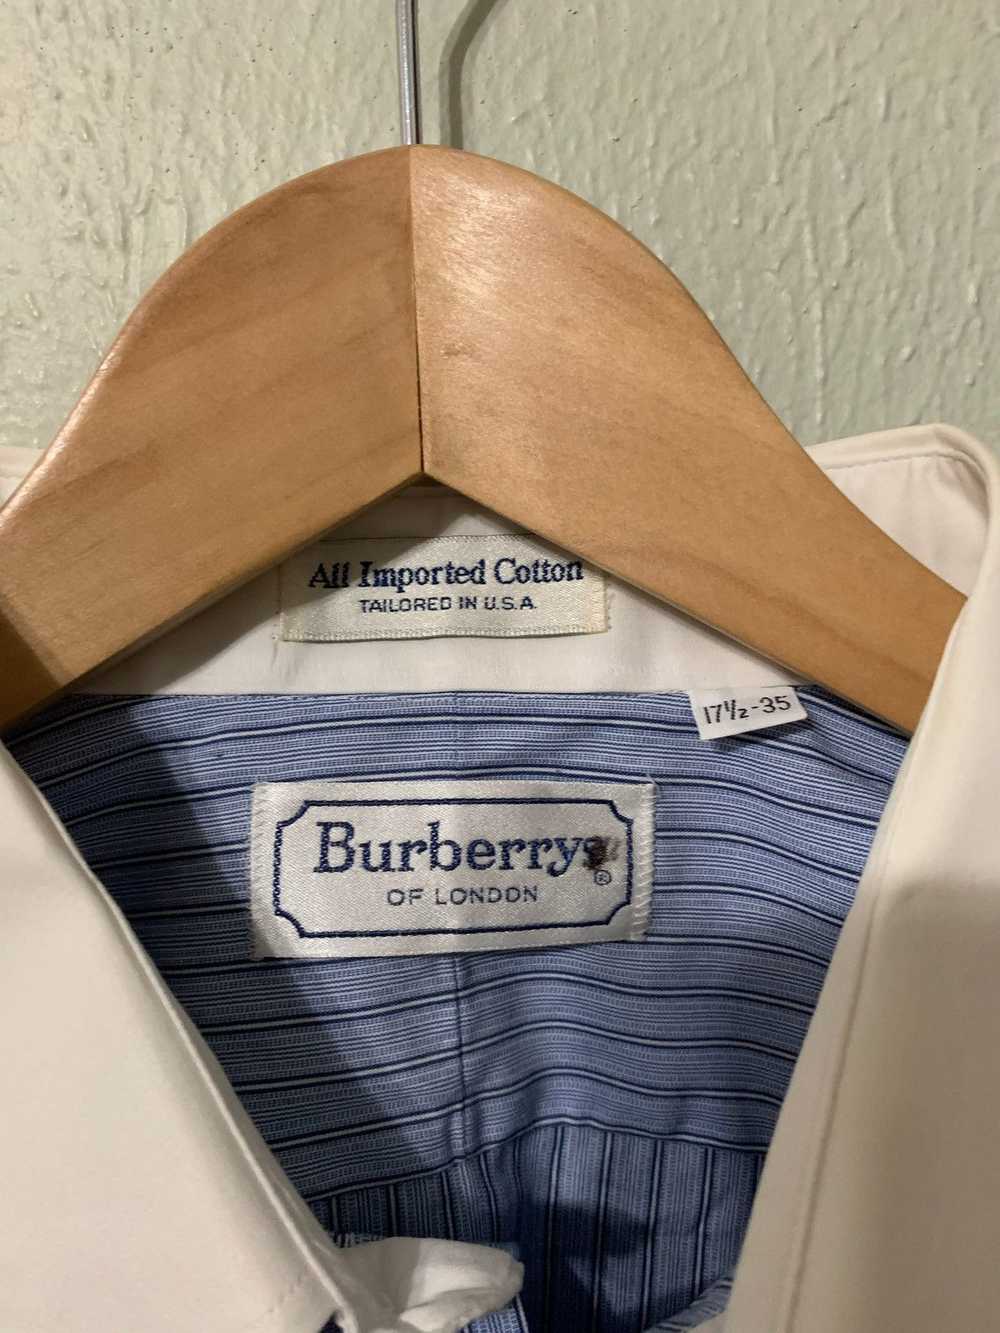 Vintage Vintage Burberry French Cuff Shirt - image 2